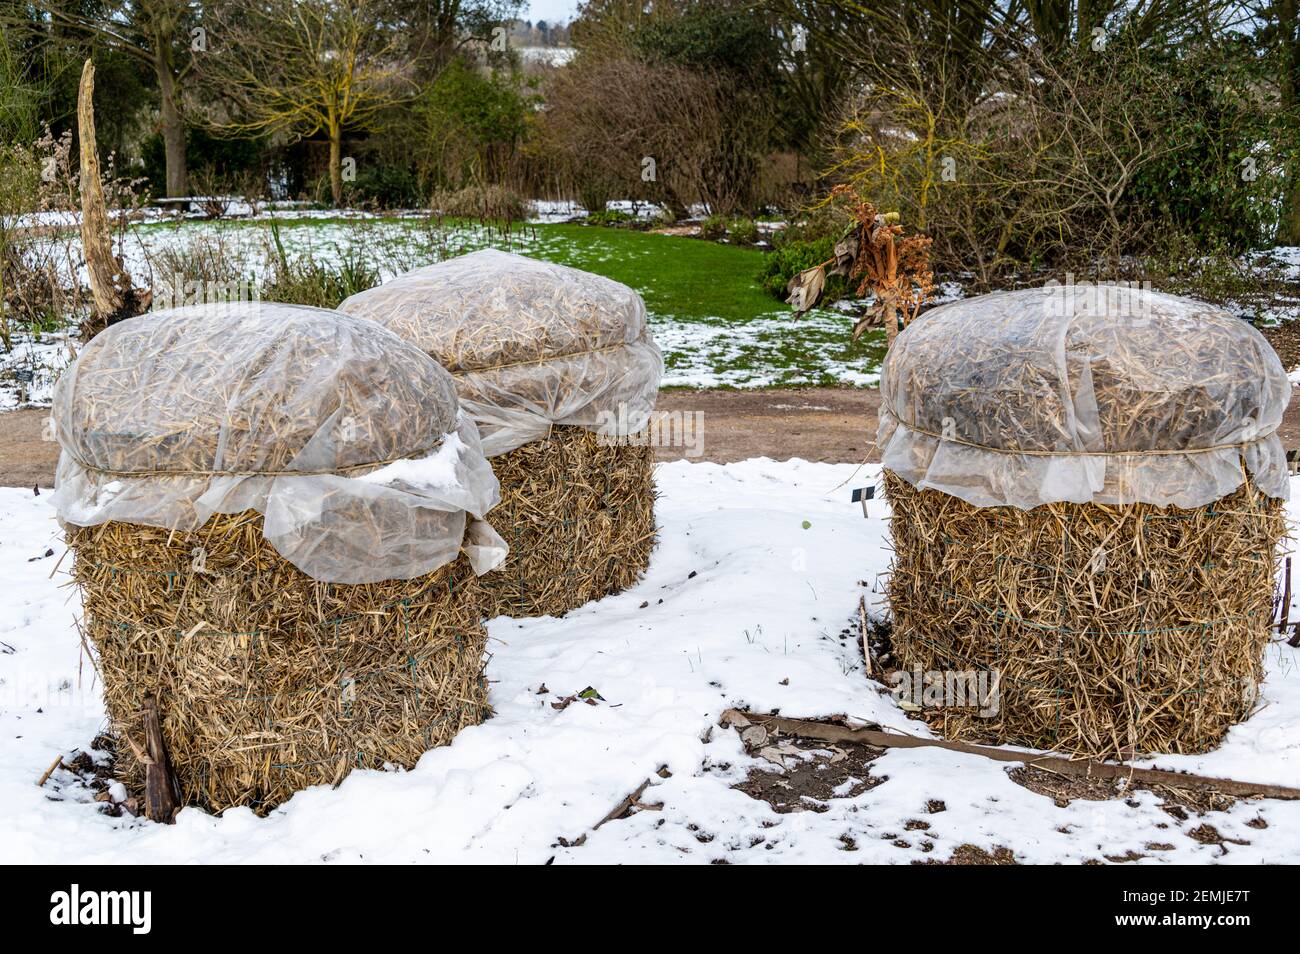 Tender plants wrapped up against cold winter conditions, with straw and plastic. Stock Photo